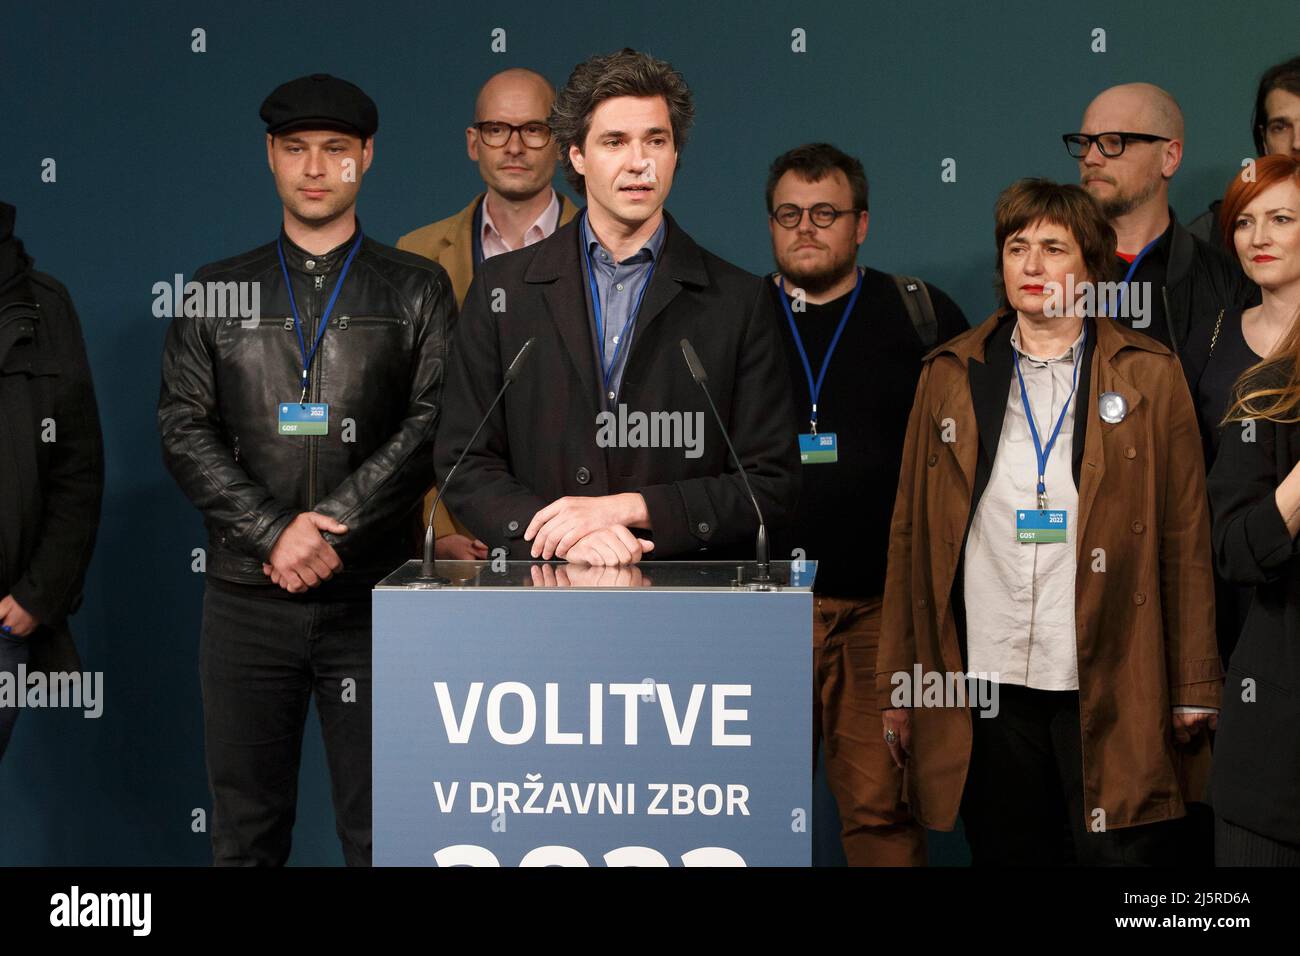 Ljubljana, Slovenia. 24th Apr, 2022. Luka Mesec (front), the leader of the Left, addresses his party at the media center in Ljubljana, Slovenia, April 24, 2022. Freedom Movement (FM), a new center-left party, recorded a landslide victory at Slovenia's general election on Sunday, defeating the center-right Slovenian Democratic Party led by Prime Minister Janez Jansa. Credit: Zeljko Stevanic/Xinhua/Alamy Live News Stock Photo